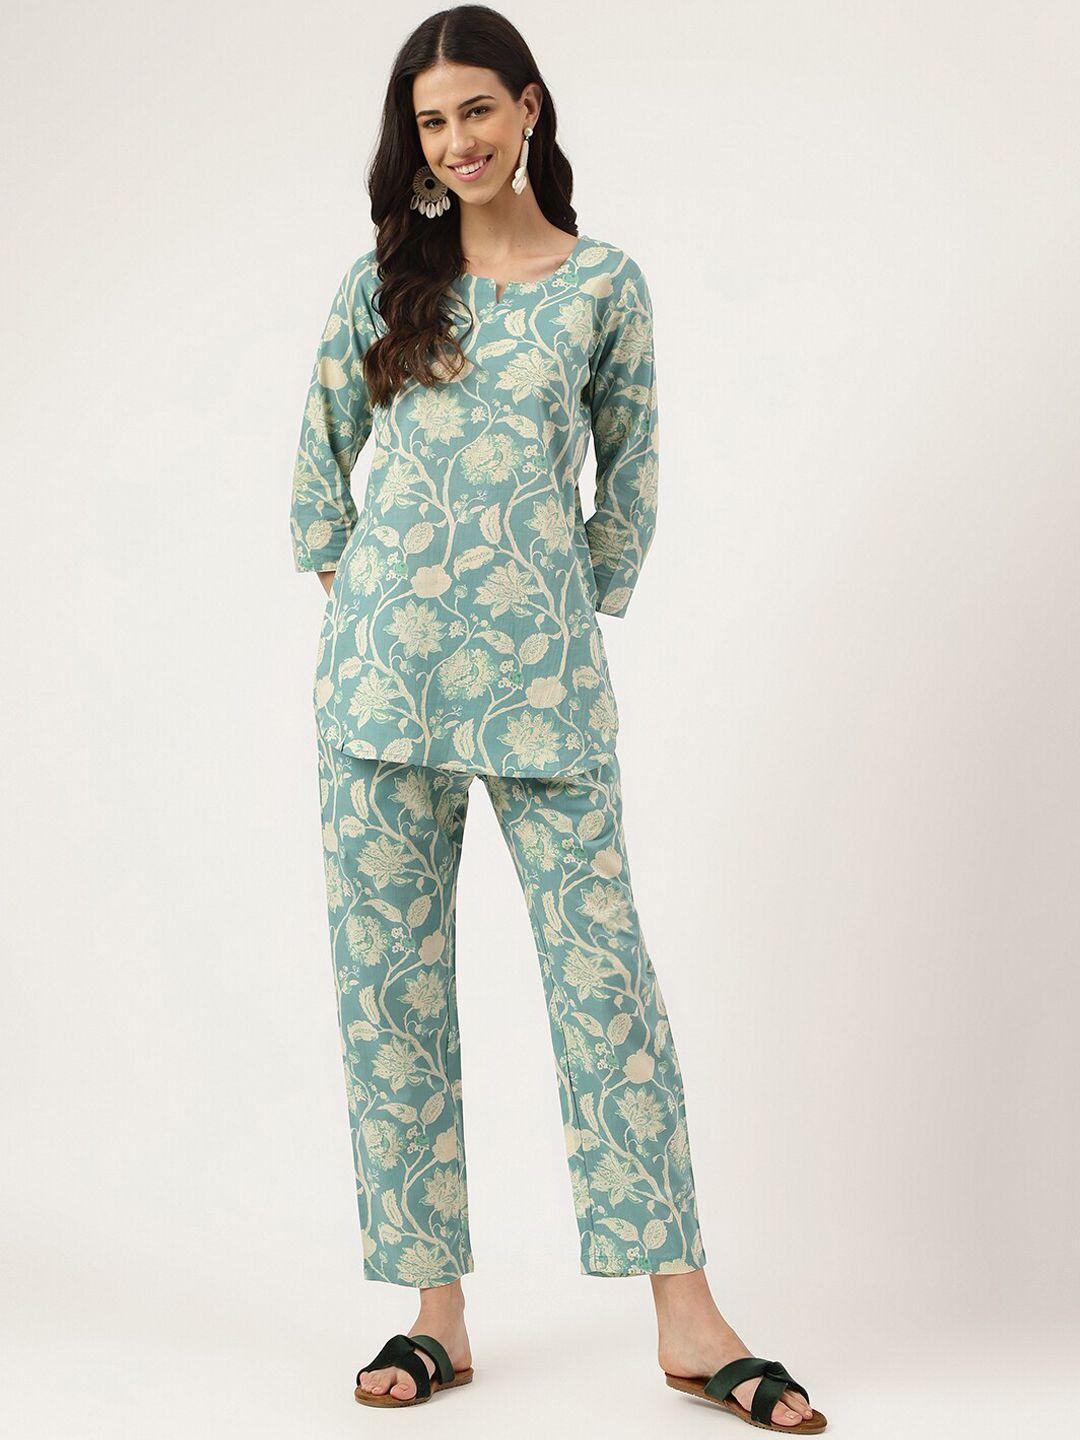 kalini-floral-printed-pure-cotton-night-suit